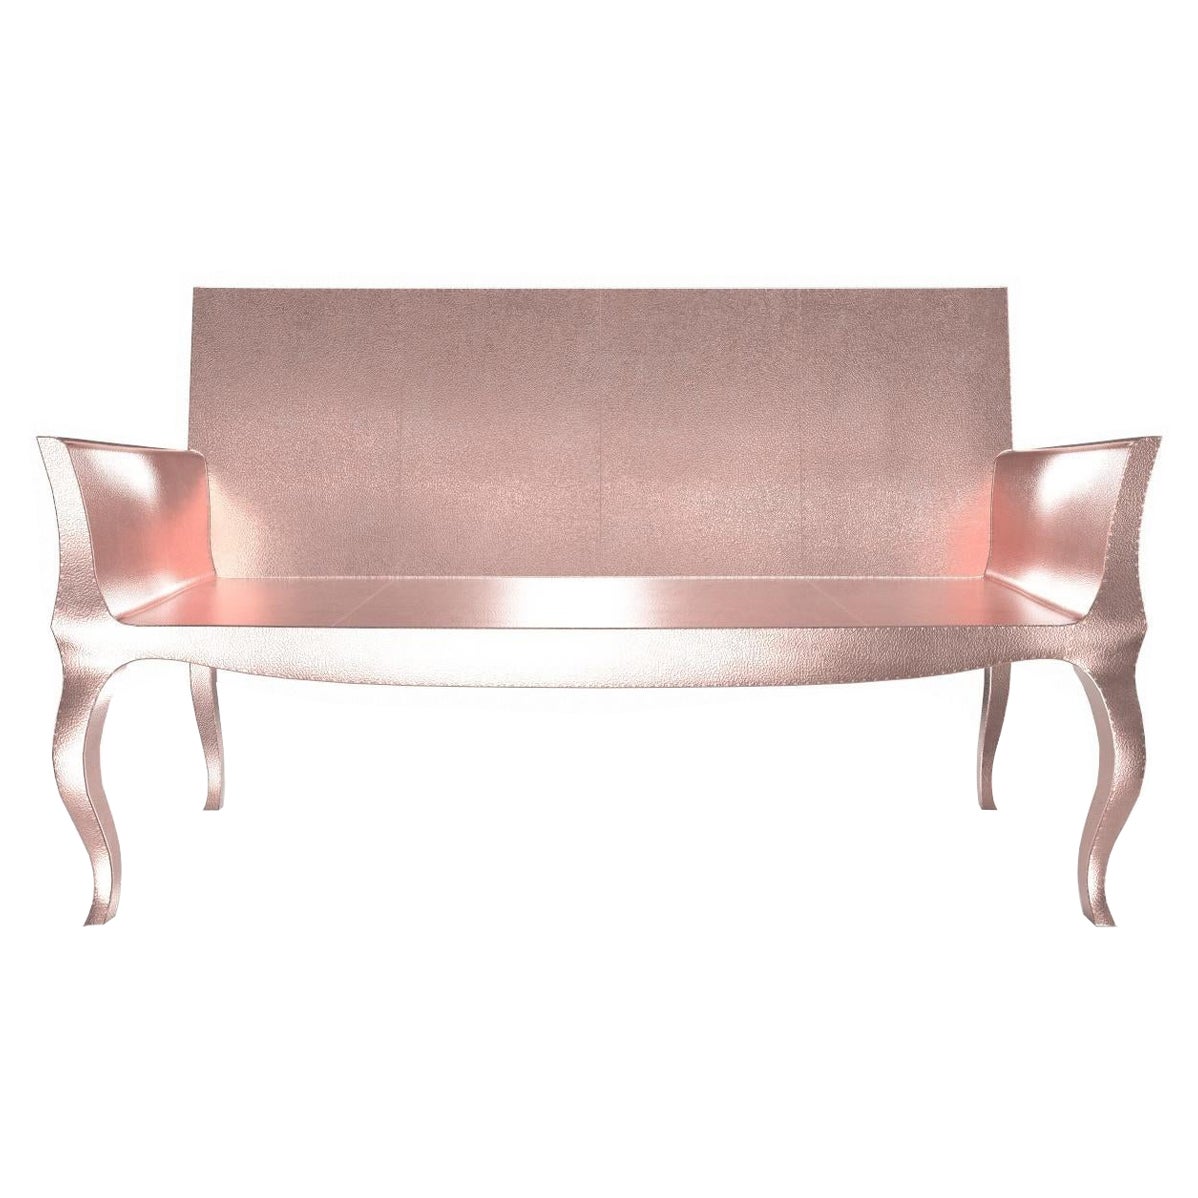 Louise Settee Art Deco Loveseats in Fine Hammered Copper by Paul Mathieu